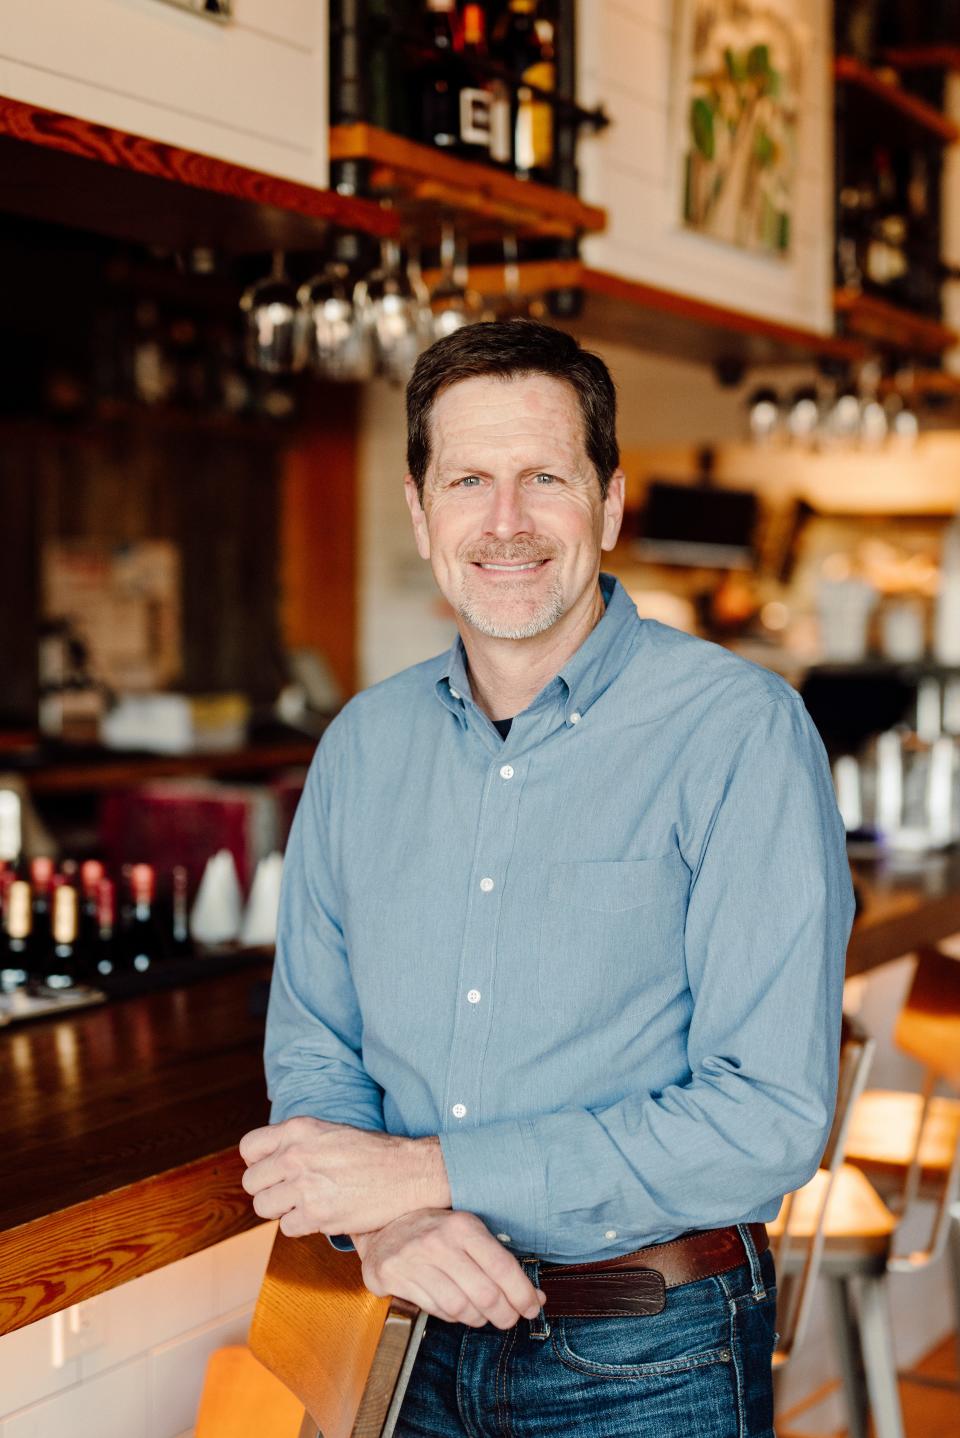 Kirk Cotham is one of the owners of Wolf River Hospitality Group, which is opening a new sports bar / live music venue called Nashoba at Carriage Crossing in Collierville.